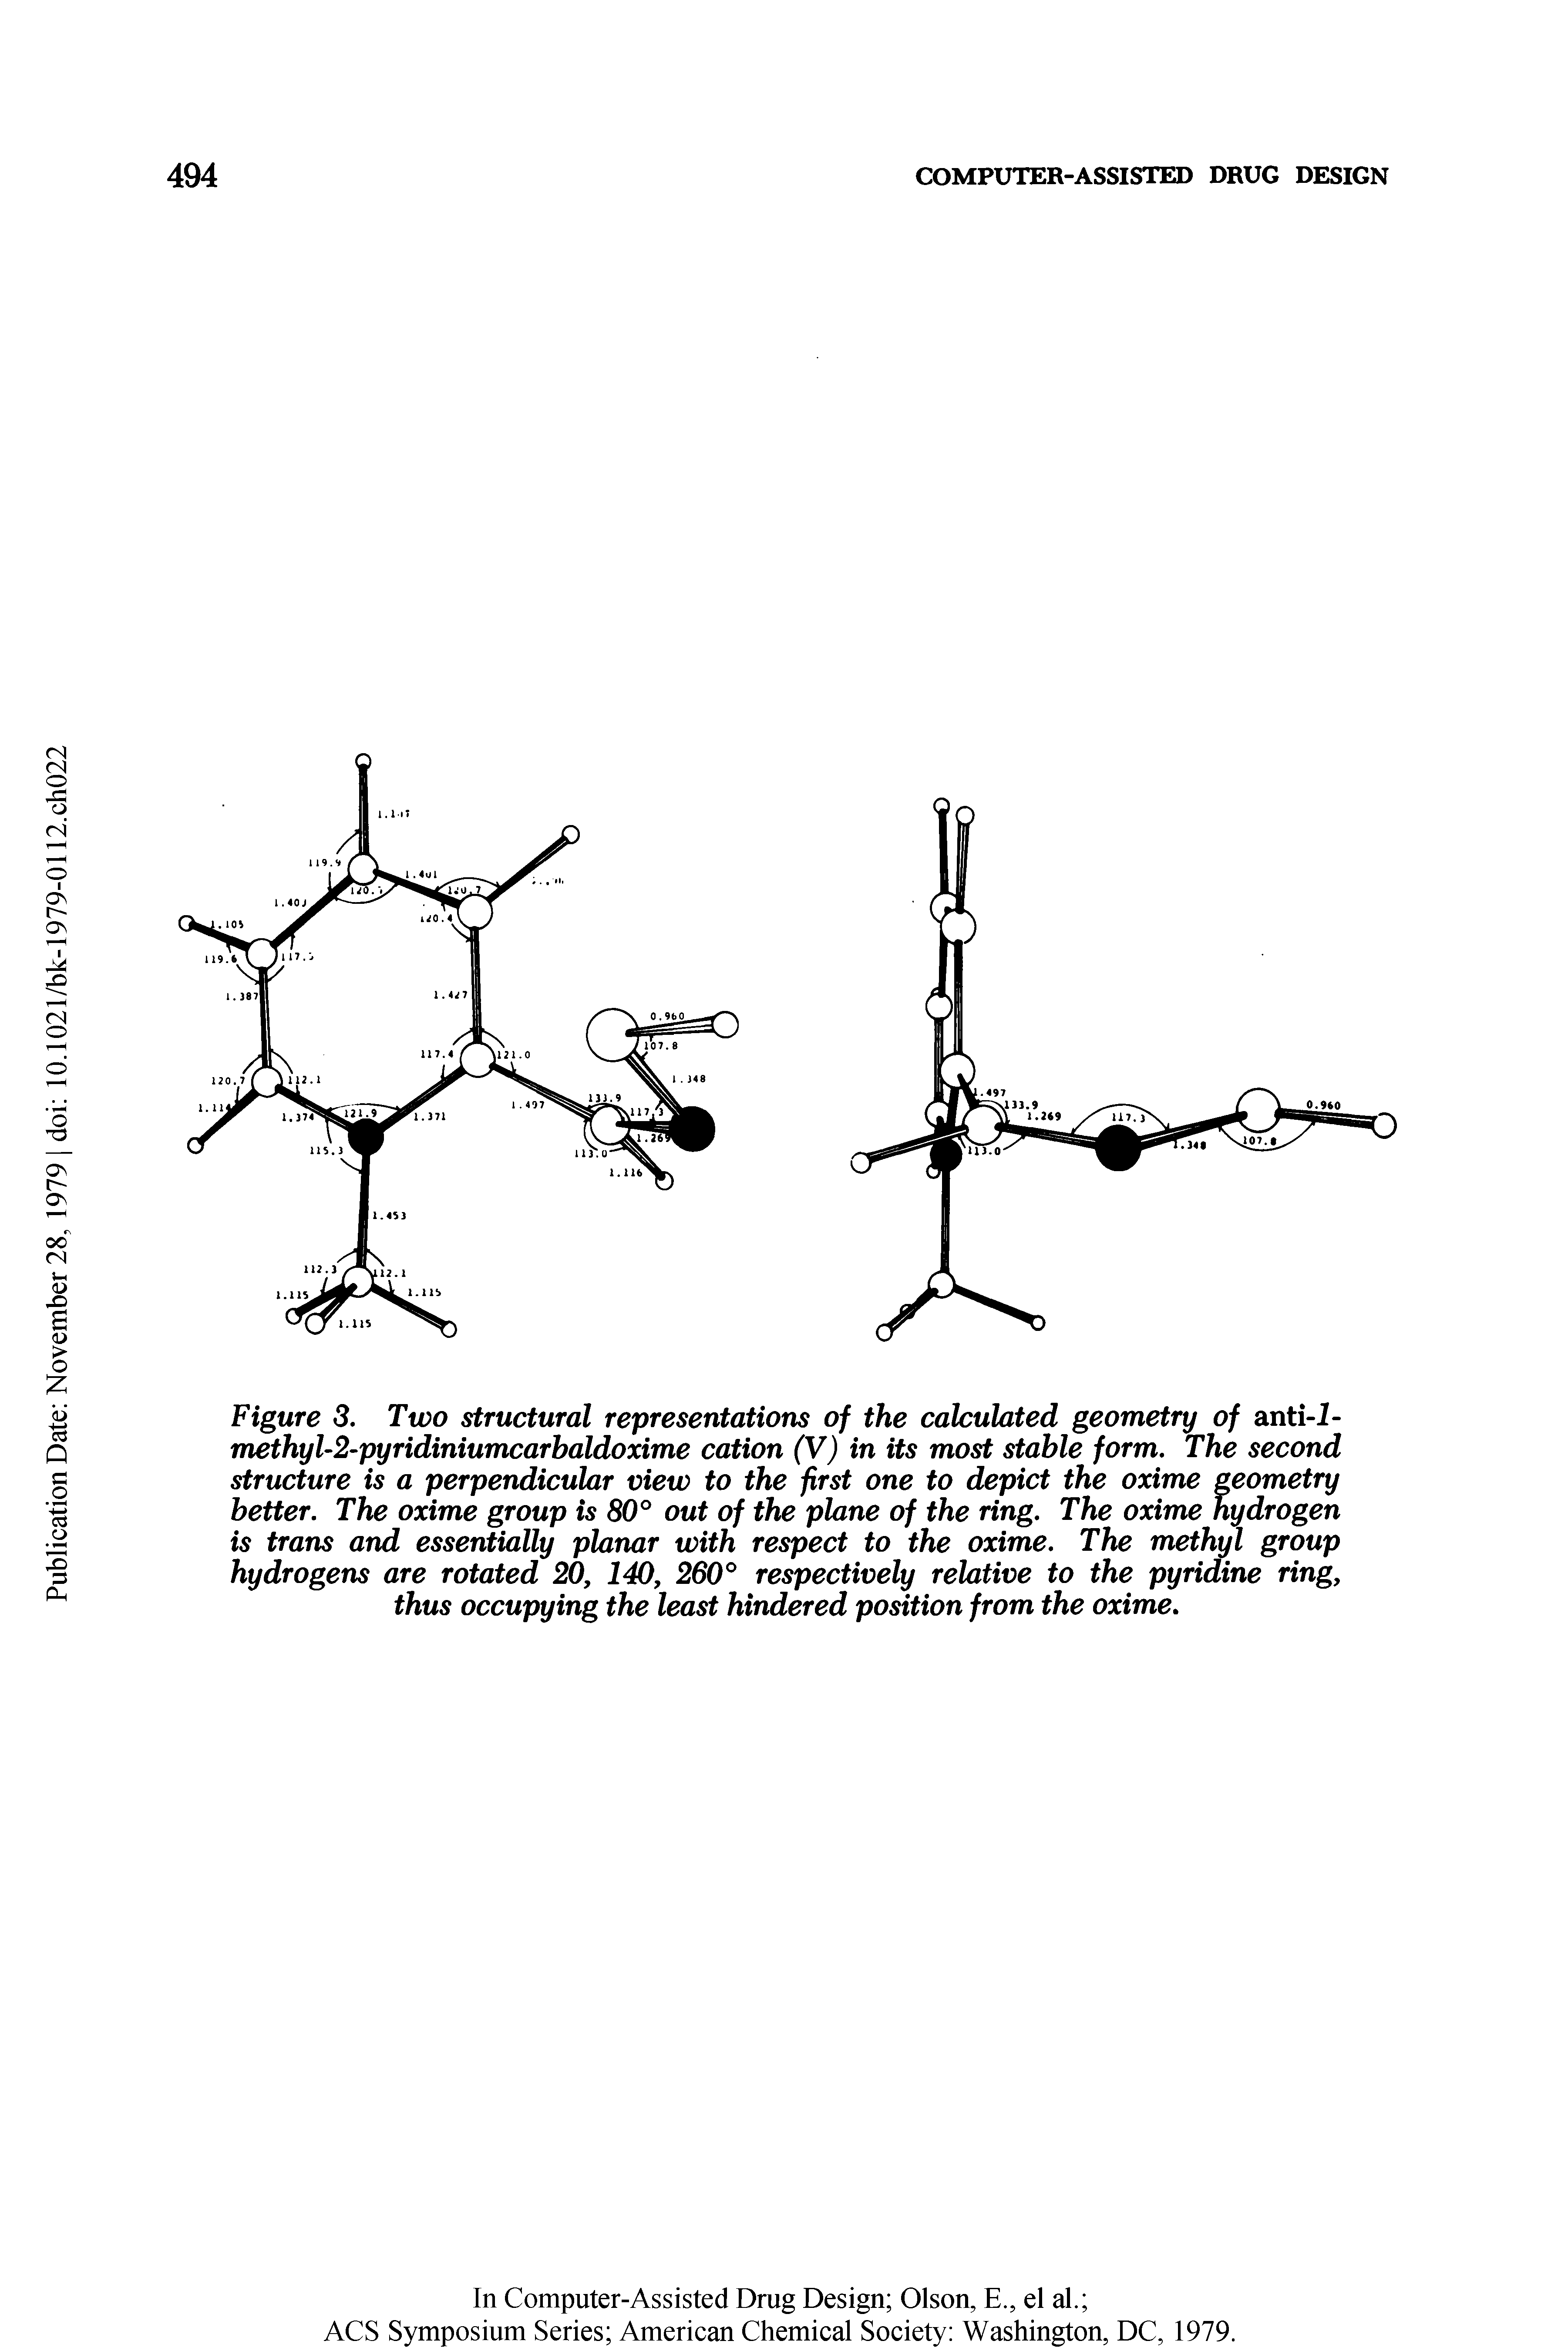 Figure 3. Two structural representations of the calculated geometry of anti-J-methyl-2-pyridiniumcarbaldoxime cation (V) in its most stable form. The second structure is a perpendicular view to the first one to depict the oxime geometry better. The oxime group is 80° out of the plane of the ring. The oxime hydrogen is trans and essentially planar with respect to the oxime. The methyl group hydrogens are rotated 20, 140, 260° respectively relative to the pyridine ring, thus occupying the least hindered position from the oxime.